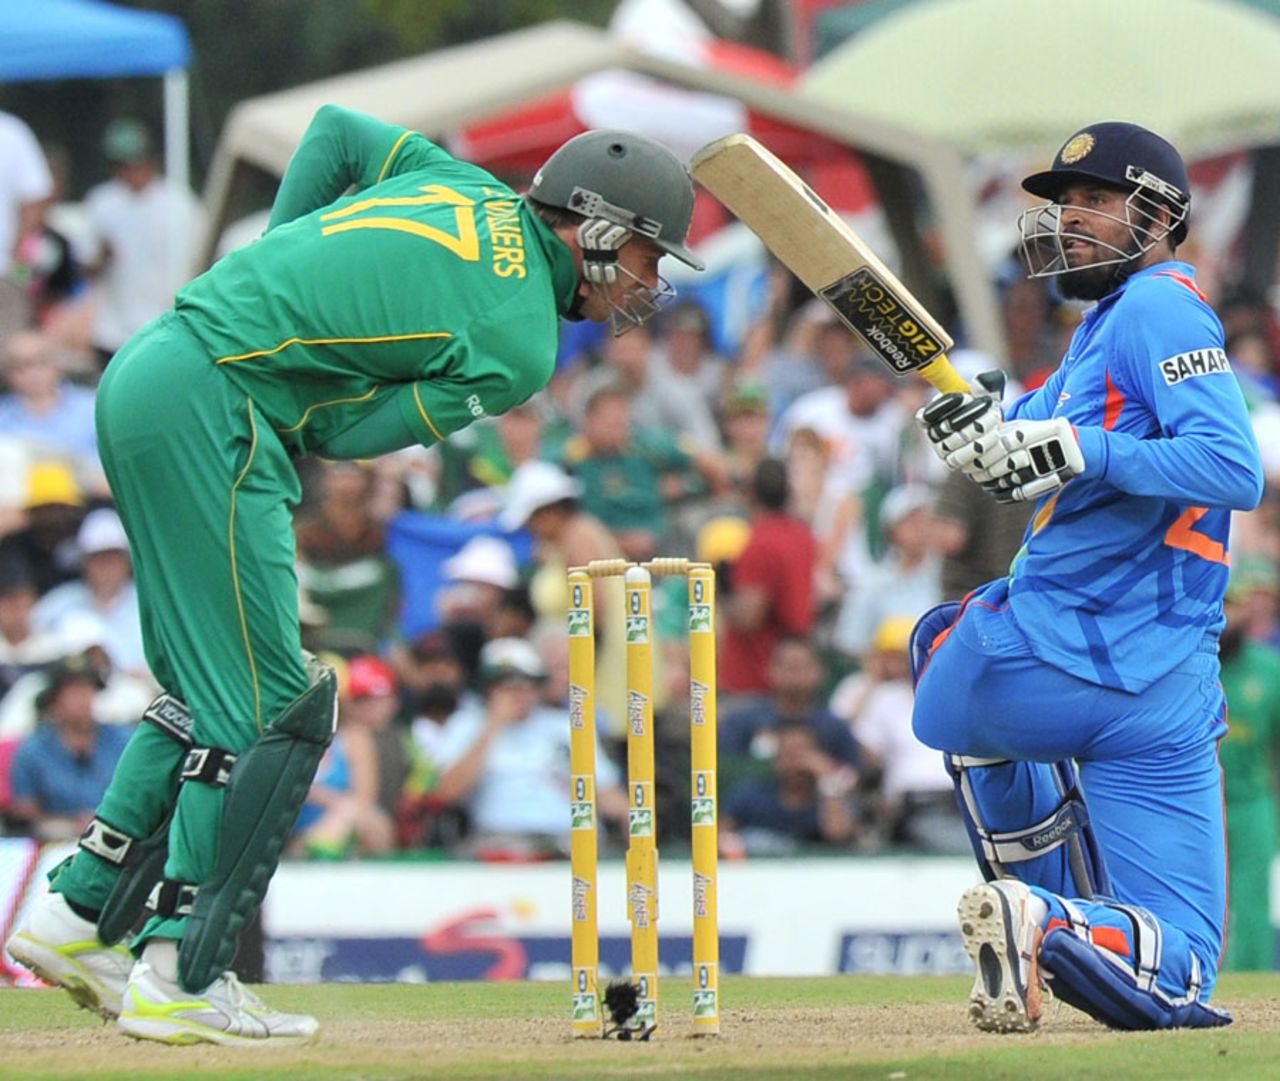 Yusuf Pathan hits one behind the wicket, South Africa v India, 5th ODI, Centurion, January 23, 2011